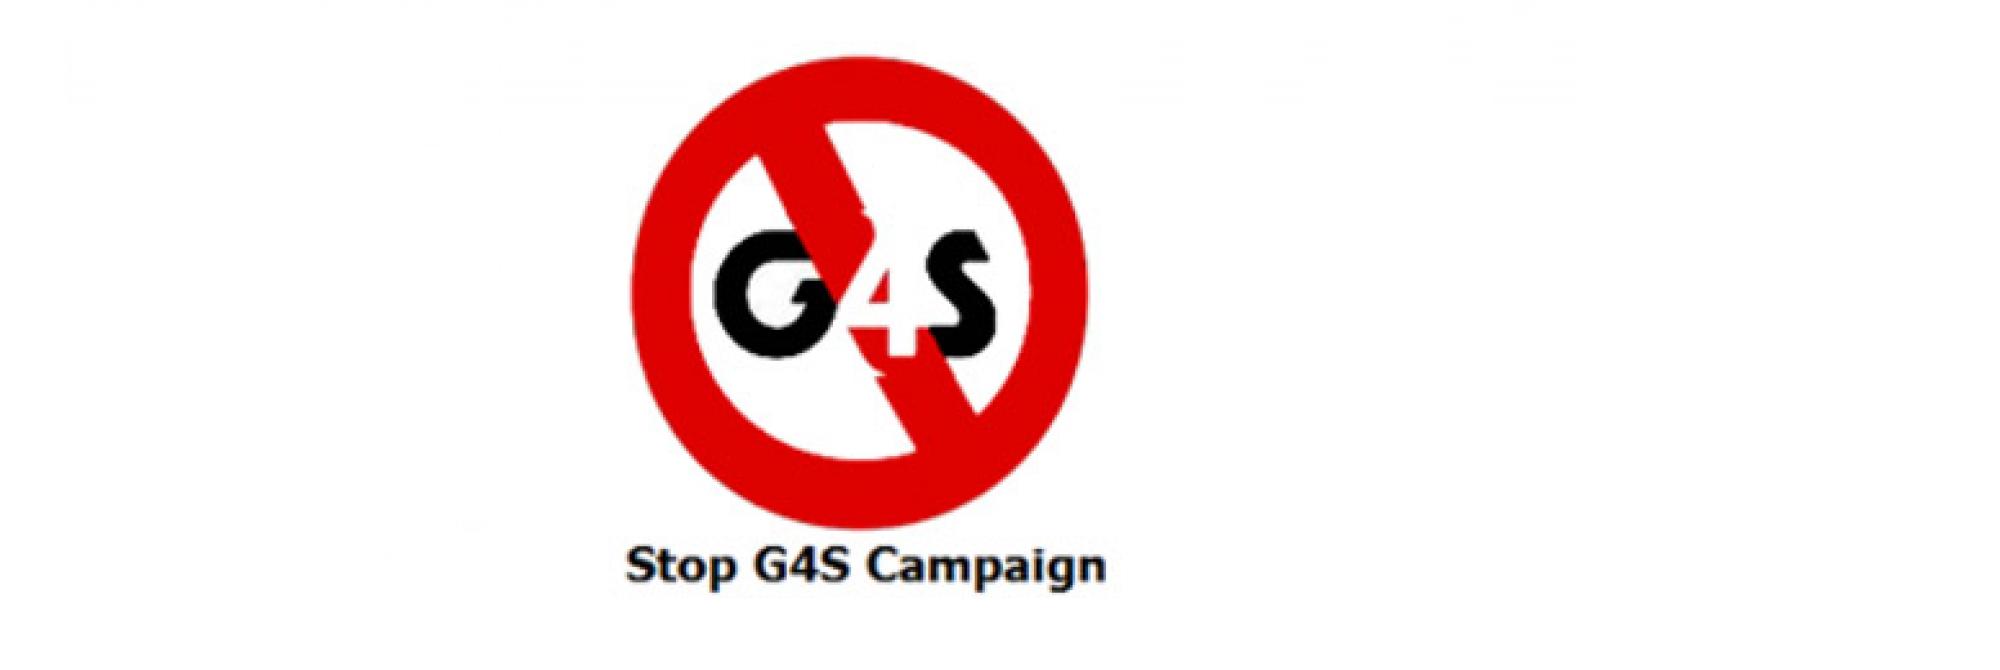 G4s PNG Images, G4s Clipart Free Download